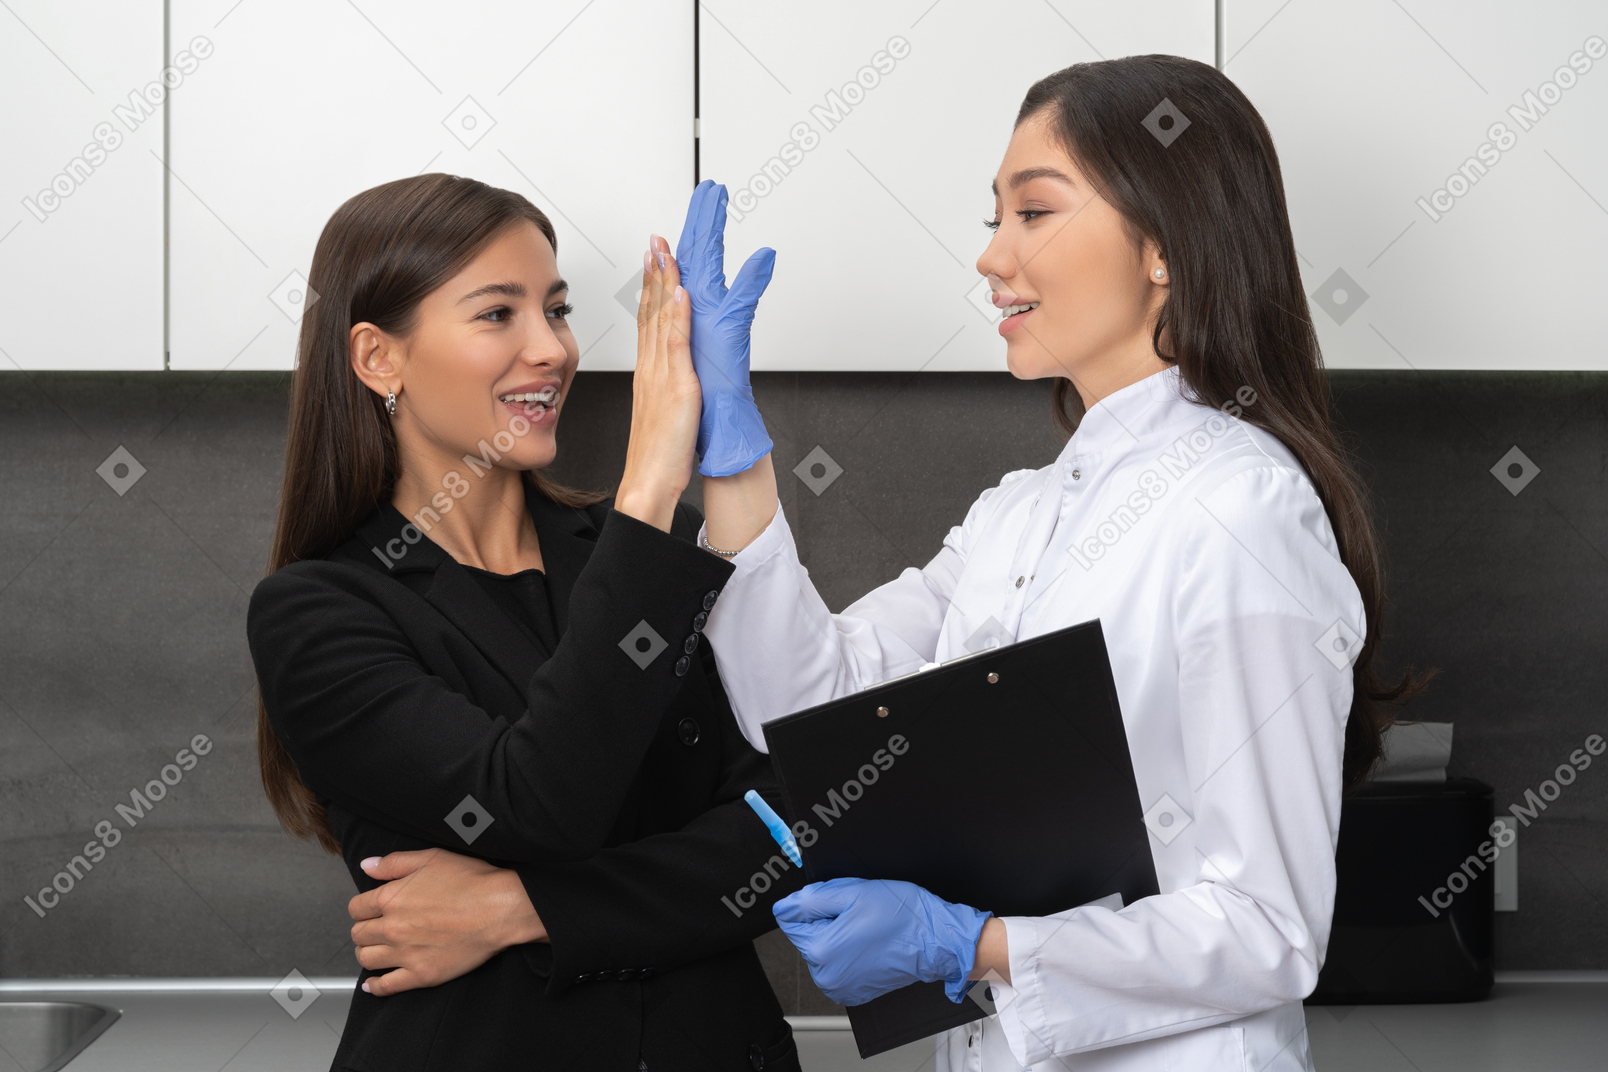 Cheerful patient and doctor giving a high-five